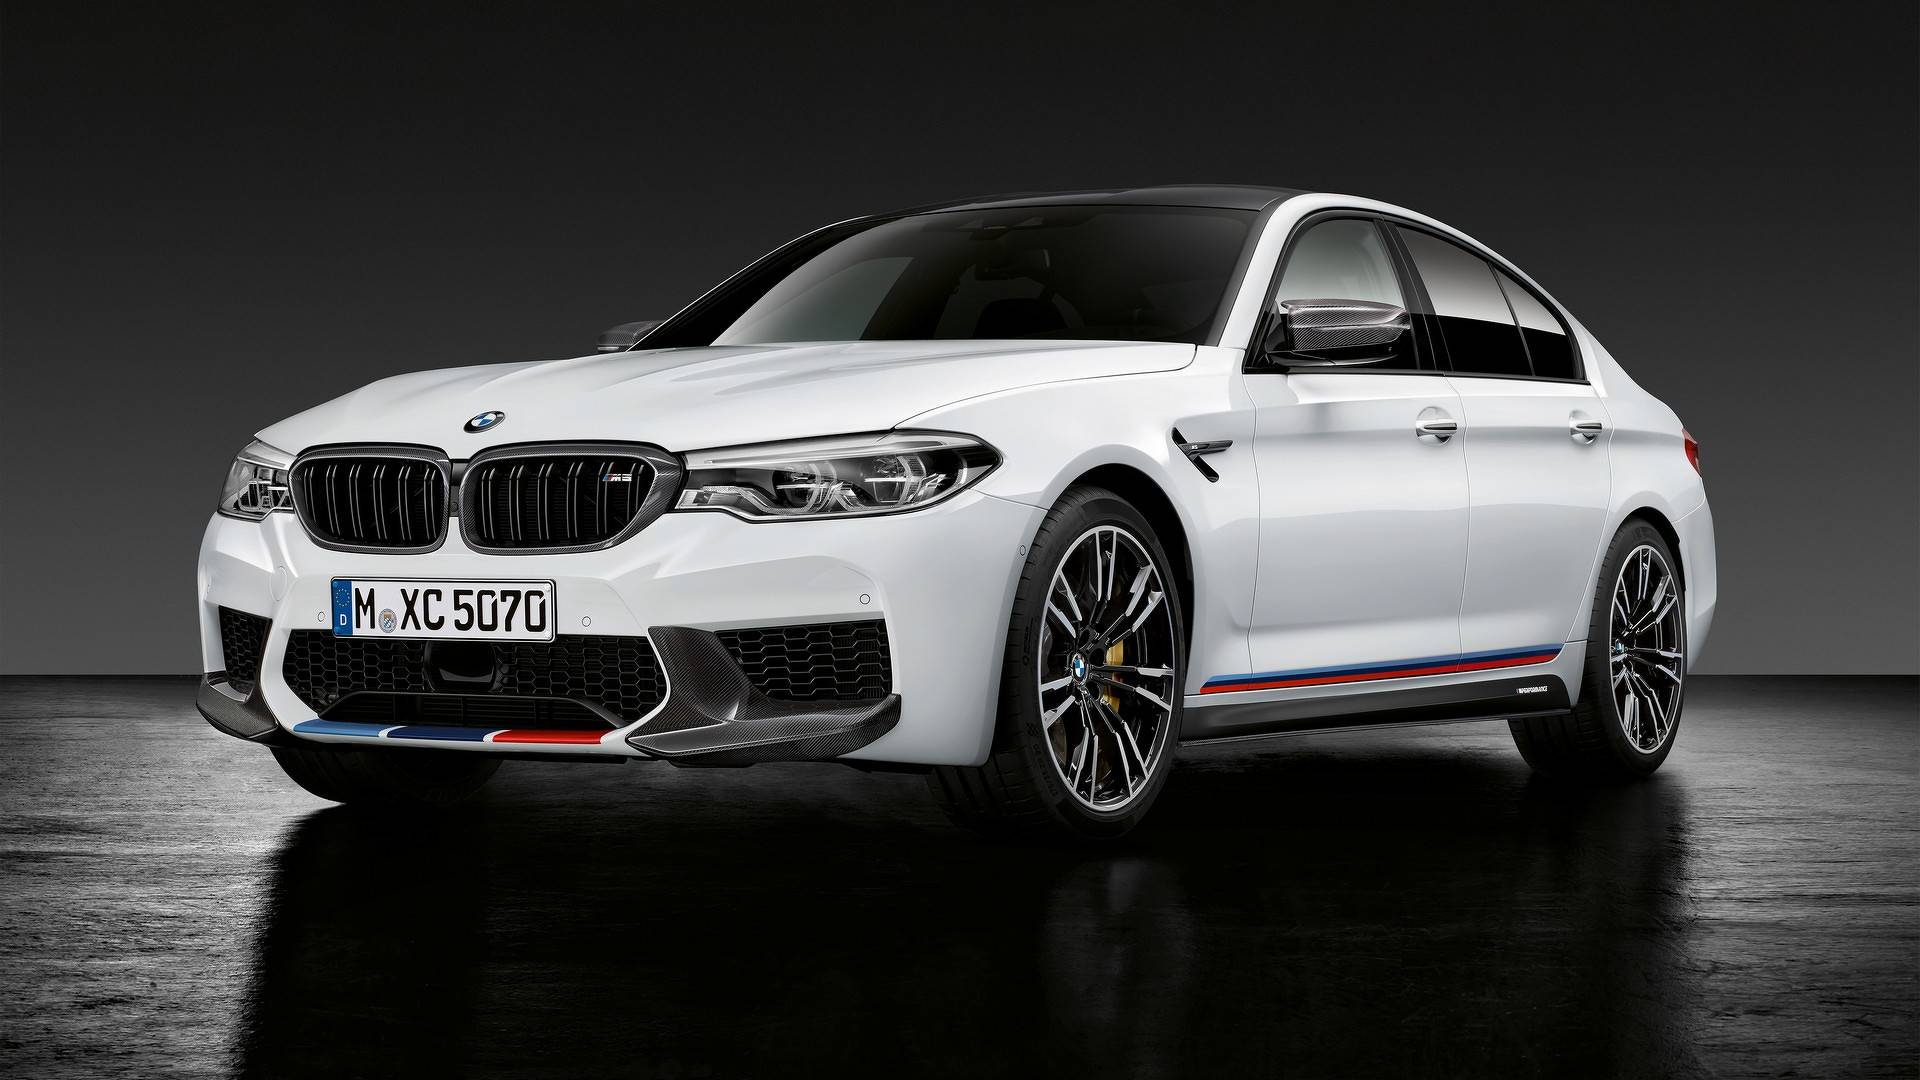 BMW M5 With M Performance Parts Gets High Speed Promo